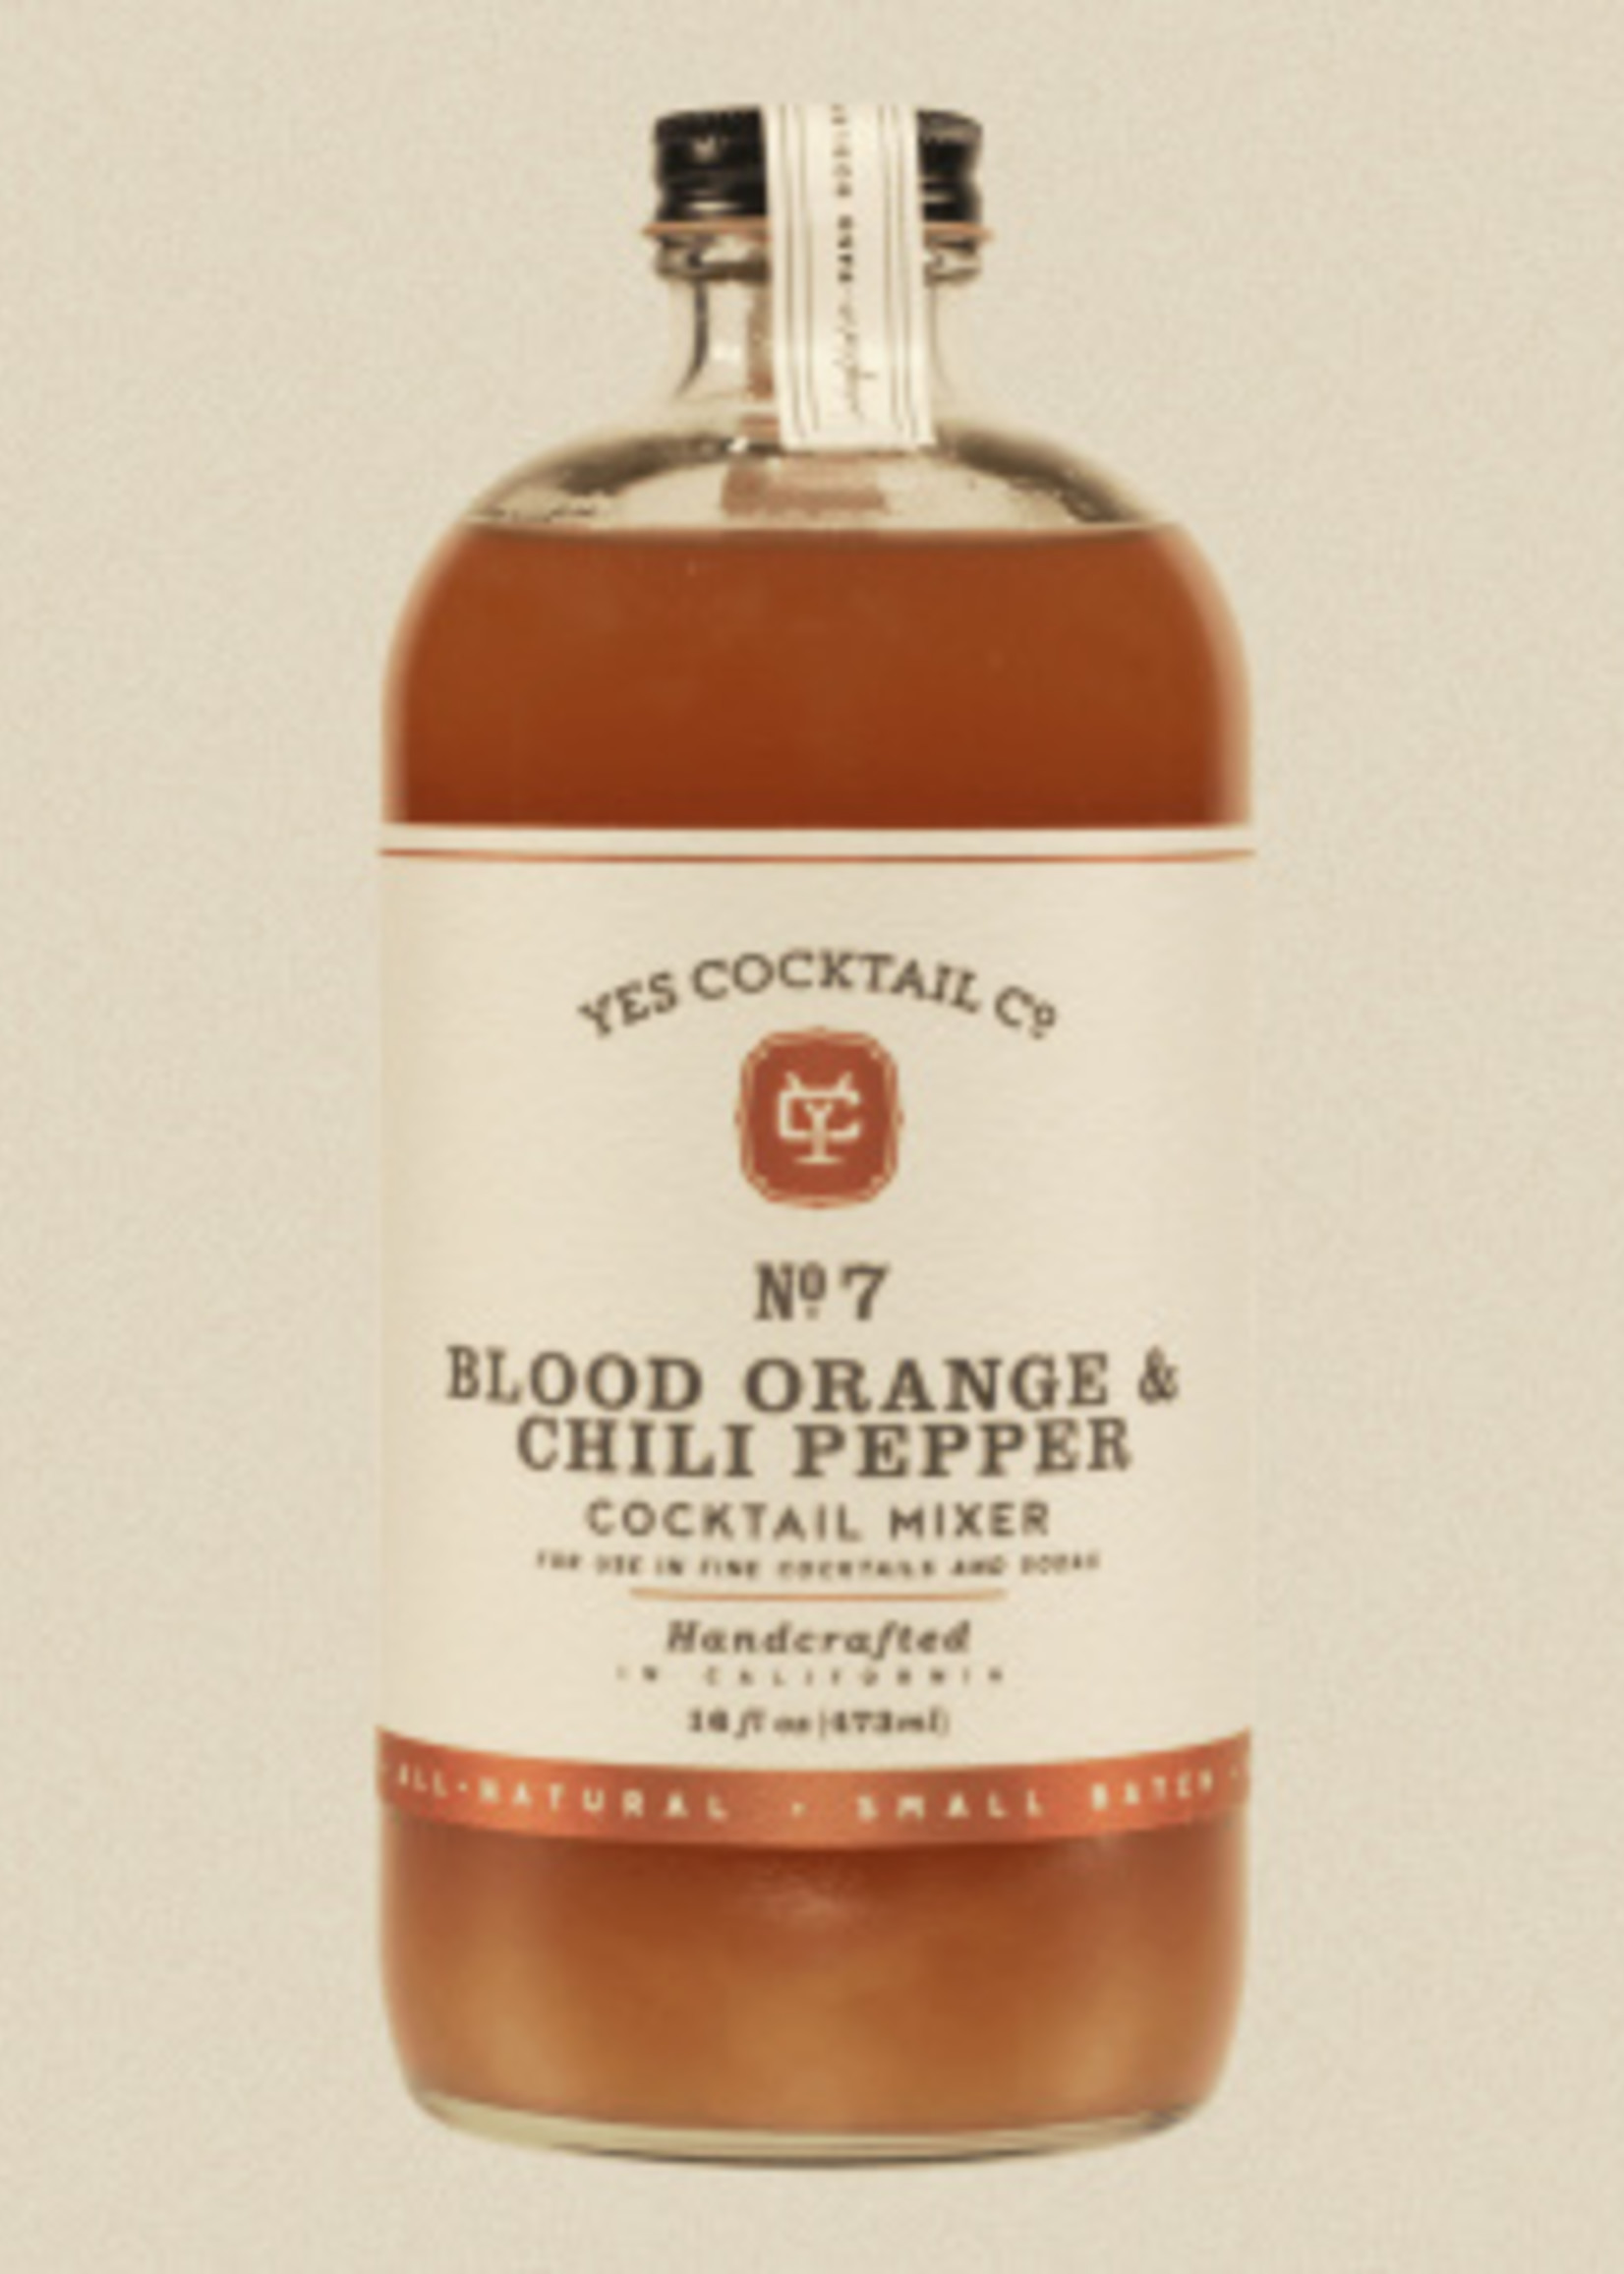 Yes Cocktail Co Yes Cocktail Co, No 7 Blood Orange and Chili Pepper Cocktail Mixer, 16oz